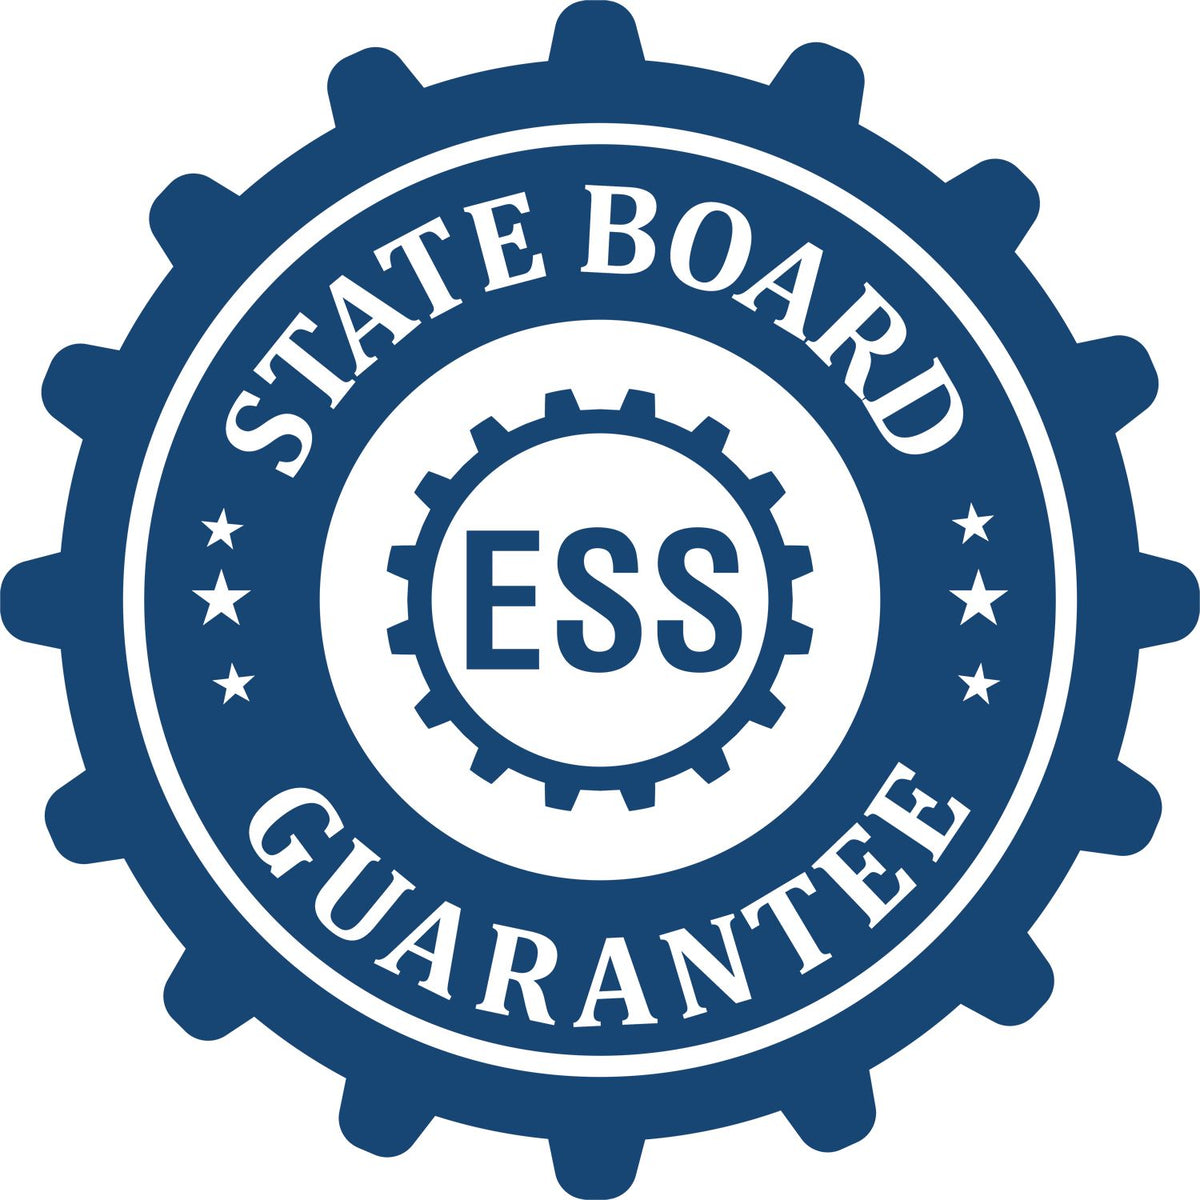 An emblem in a gear shape illustrating a state board guarantee for the Gift Vermont Land Surveyor Seal